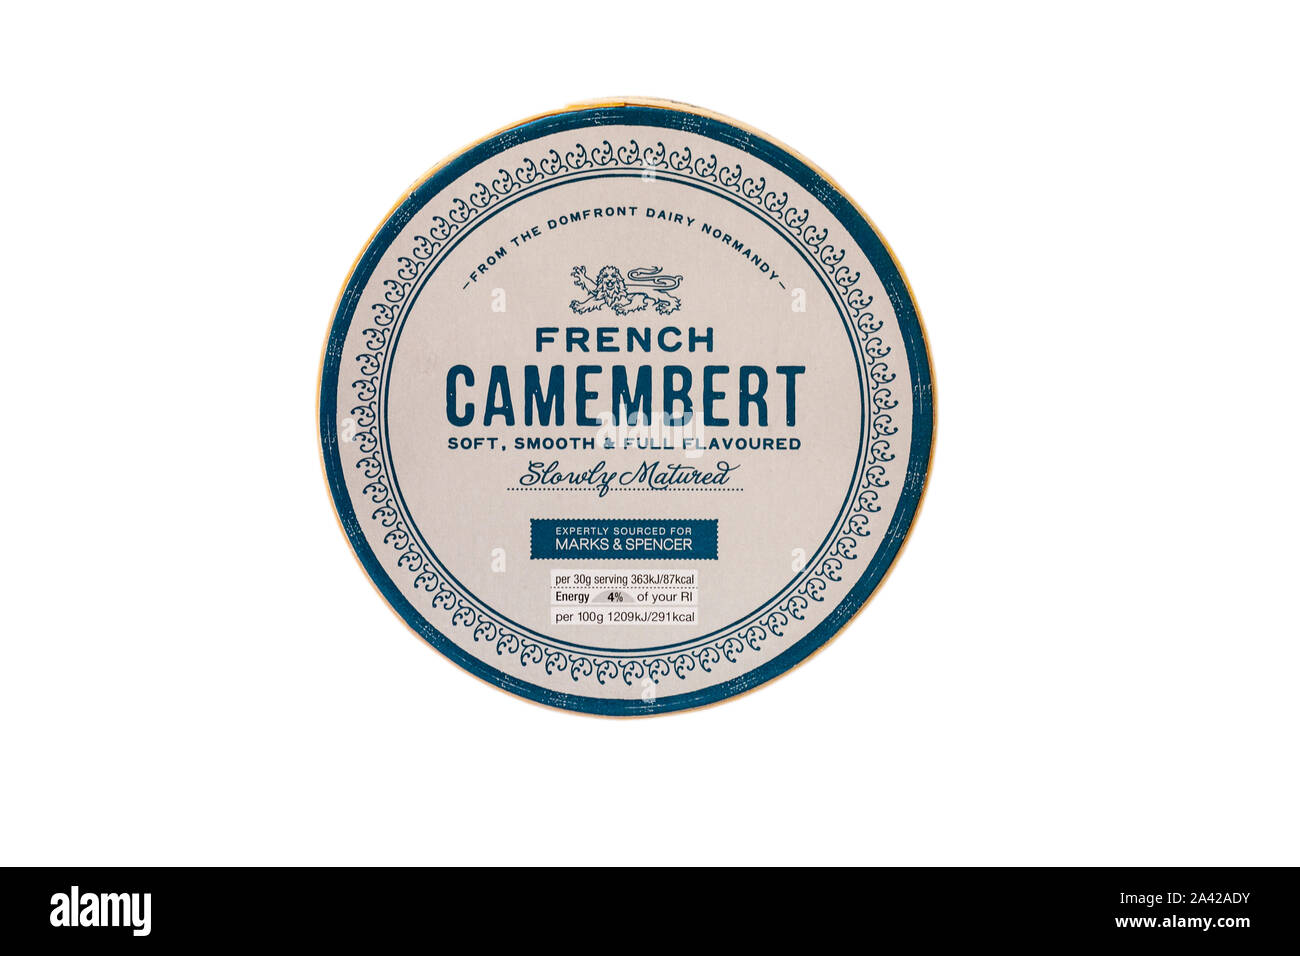 French Camembert soft smooth & full flavoured slowly matured expertly sourced for Marks & Spencer isolated on white background Stock Photo